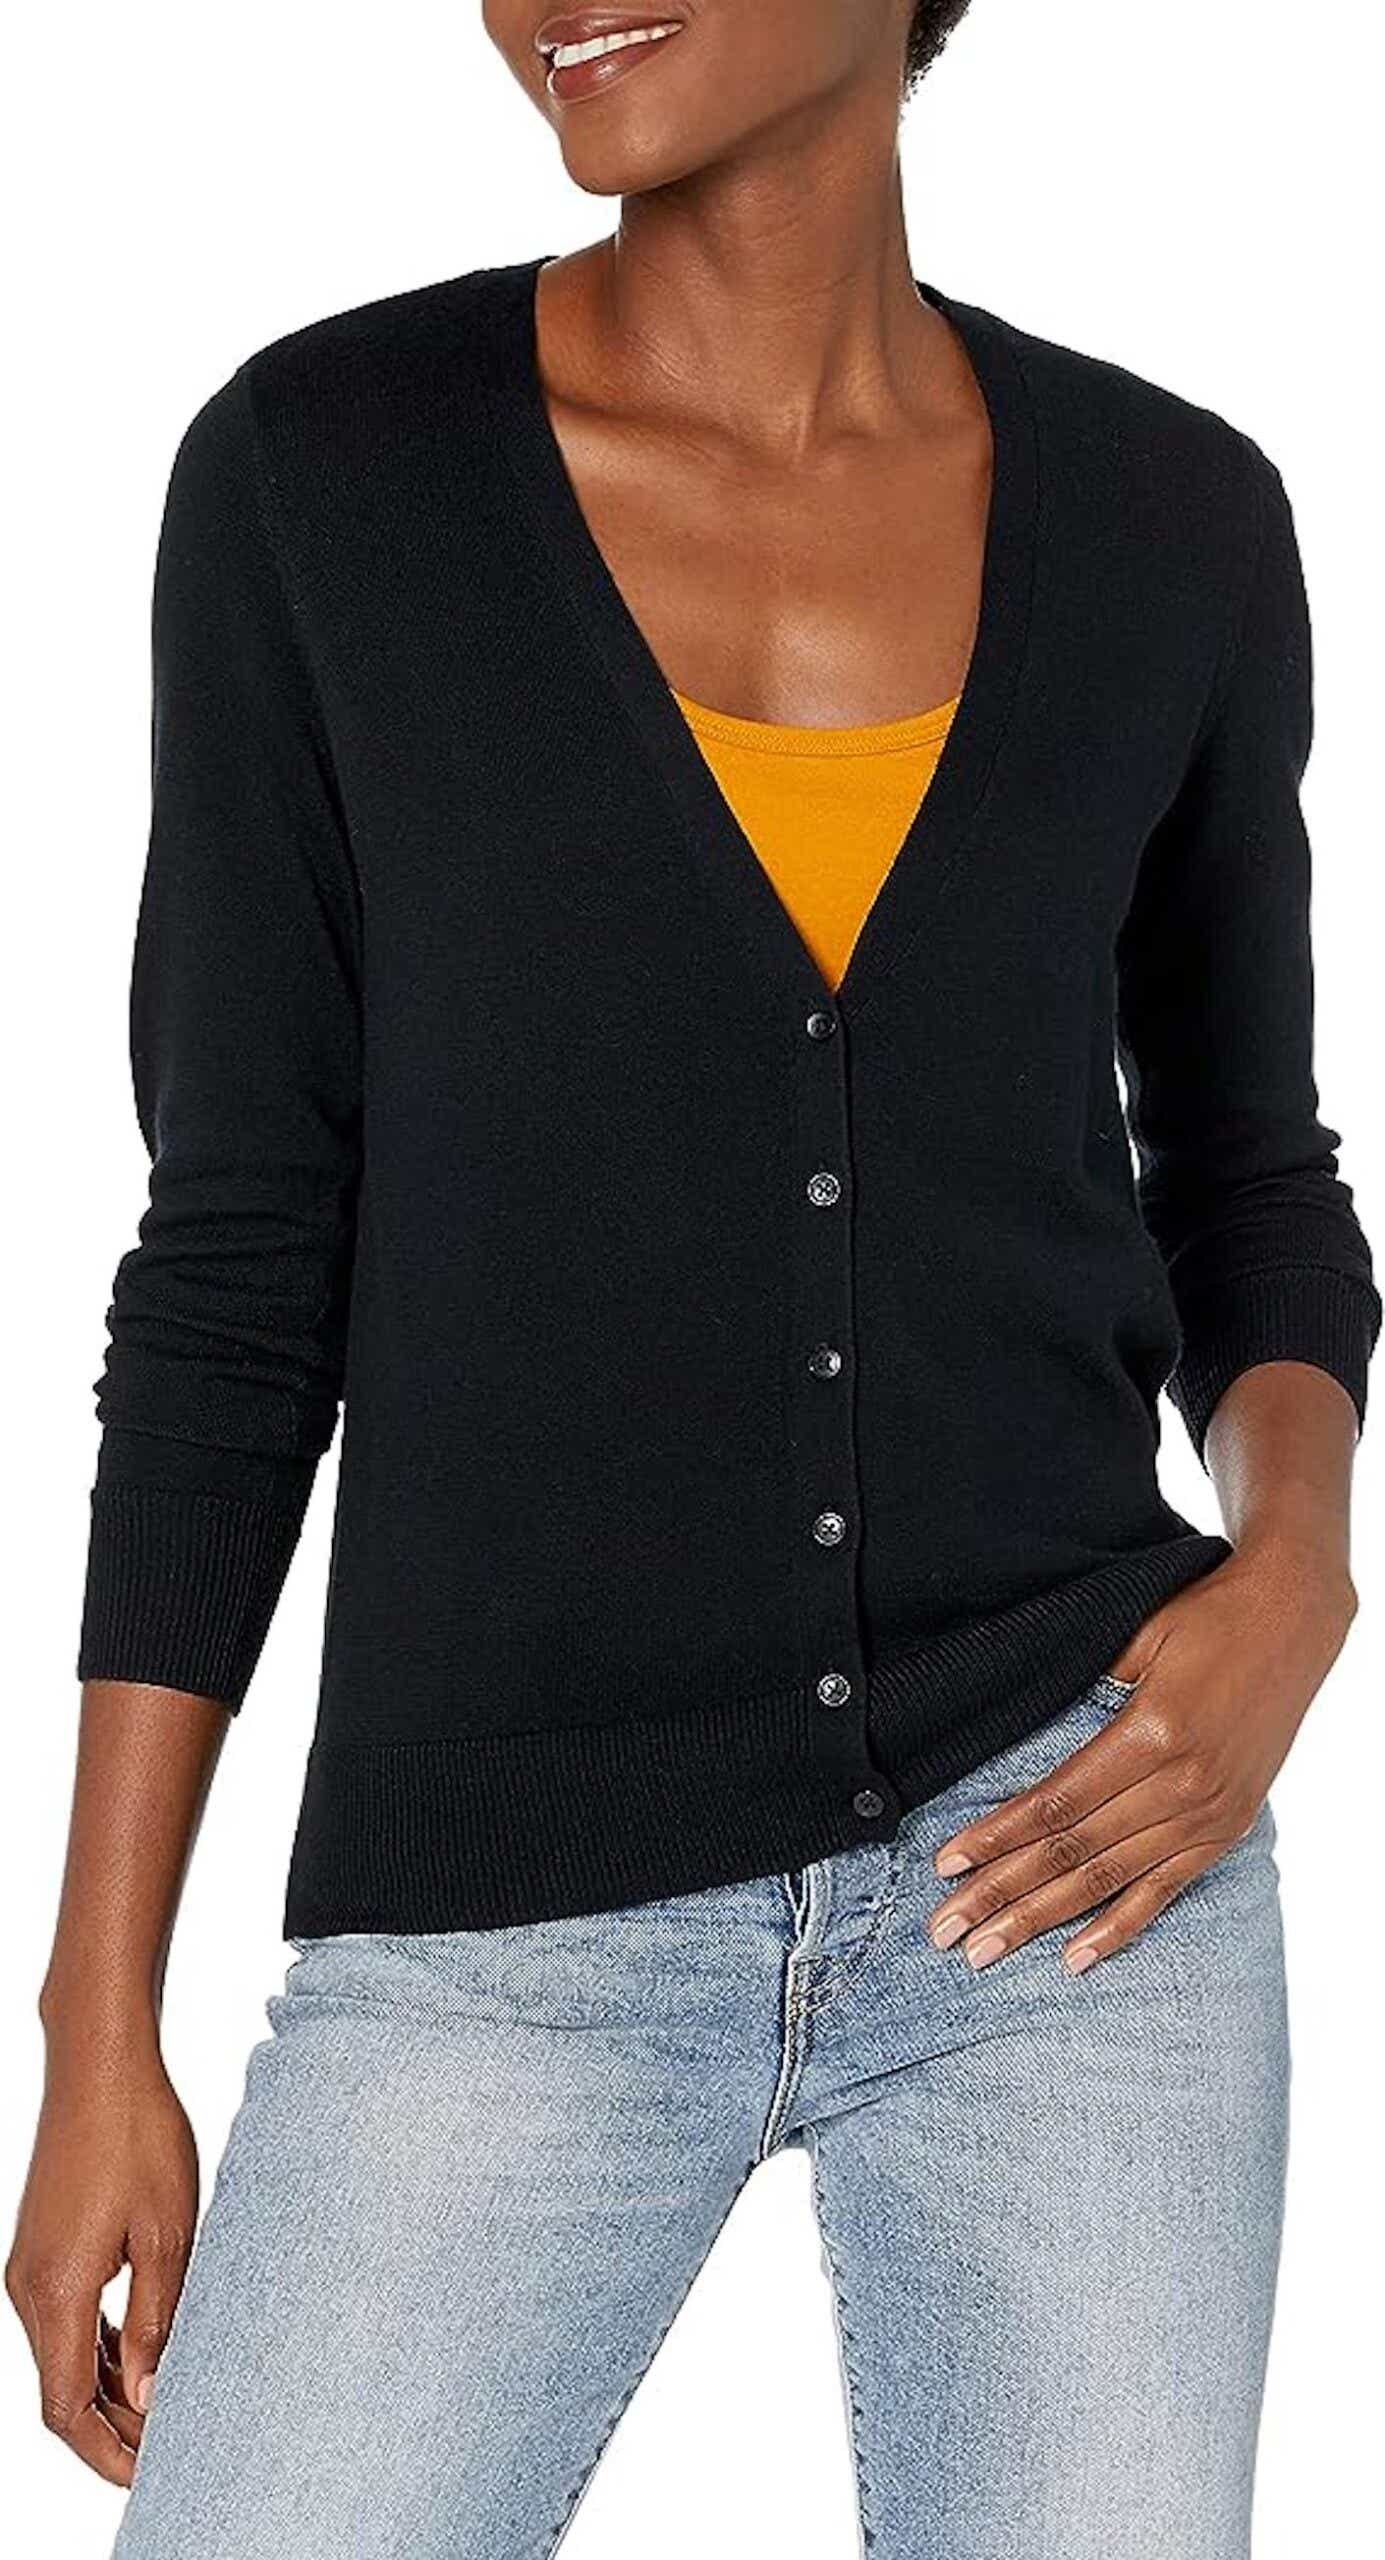 A fitted cardigan